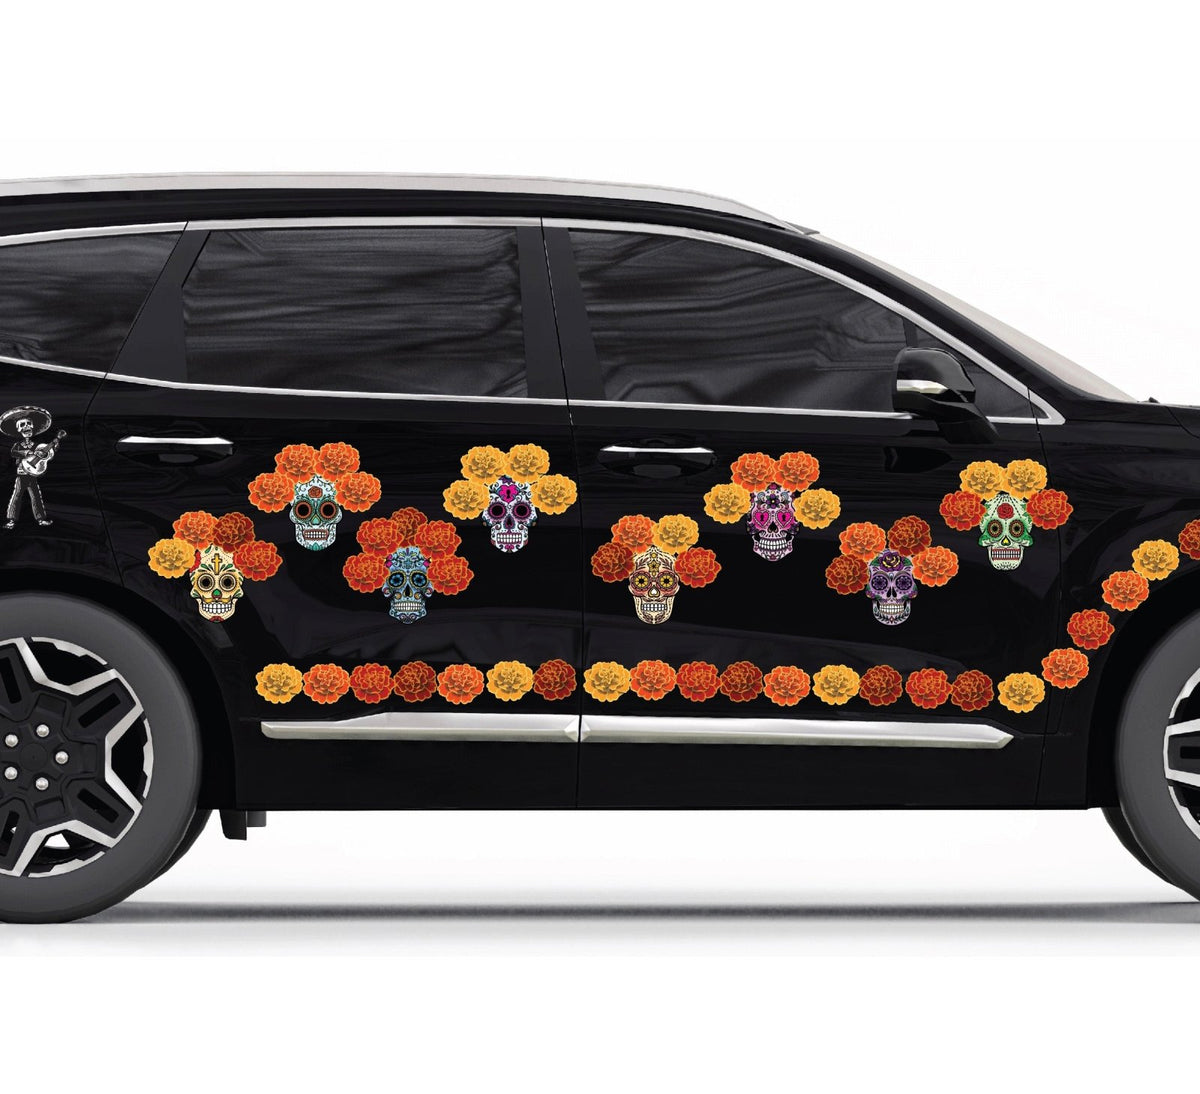 A black car decorated with colorful Day of the Dead Painted Skull Calaveras graphics and floral patterns on its side by Cover-Alls.